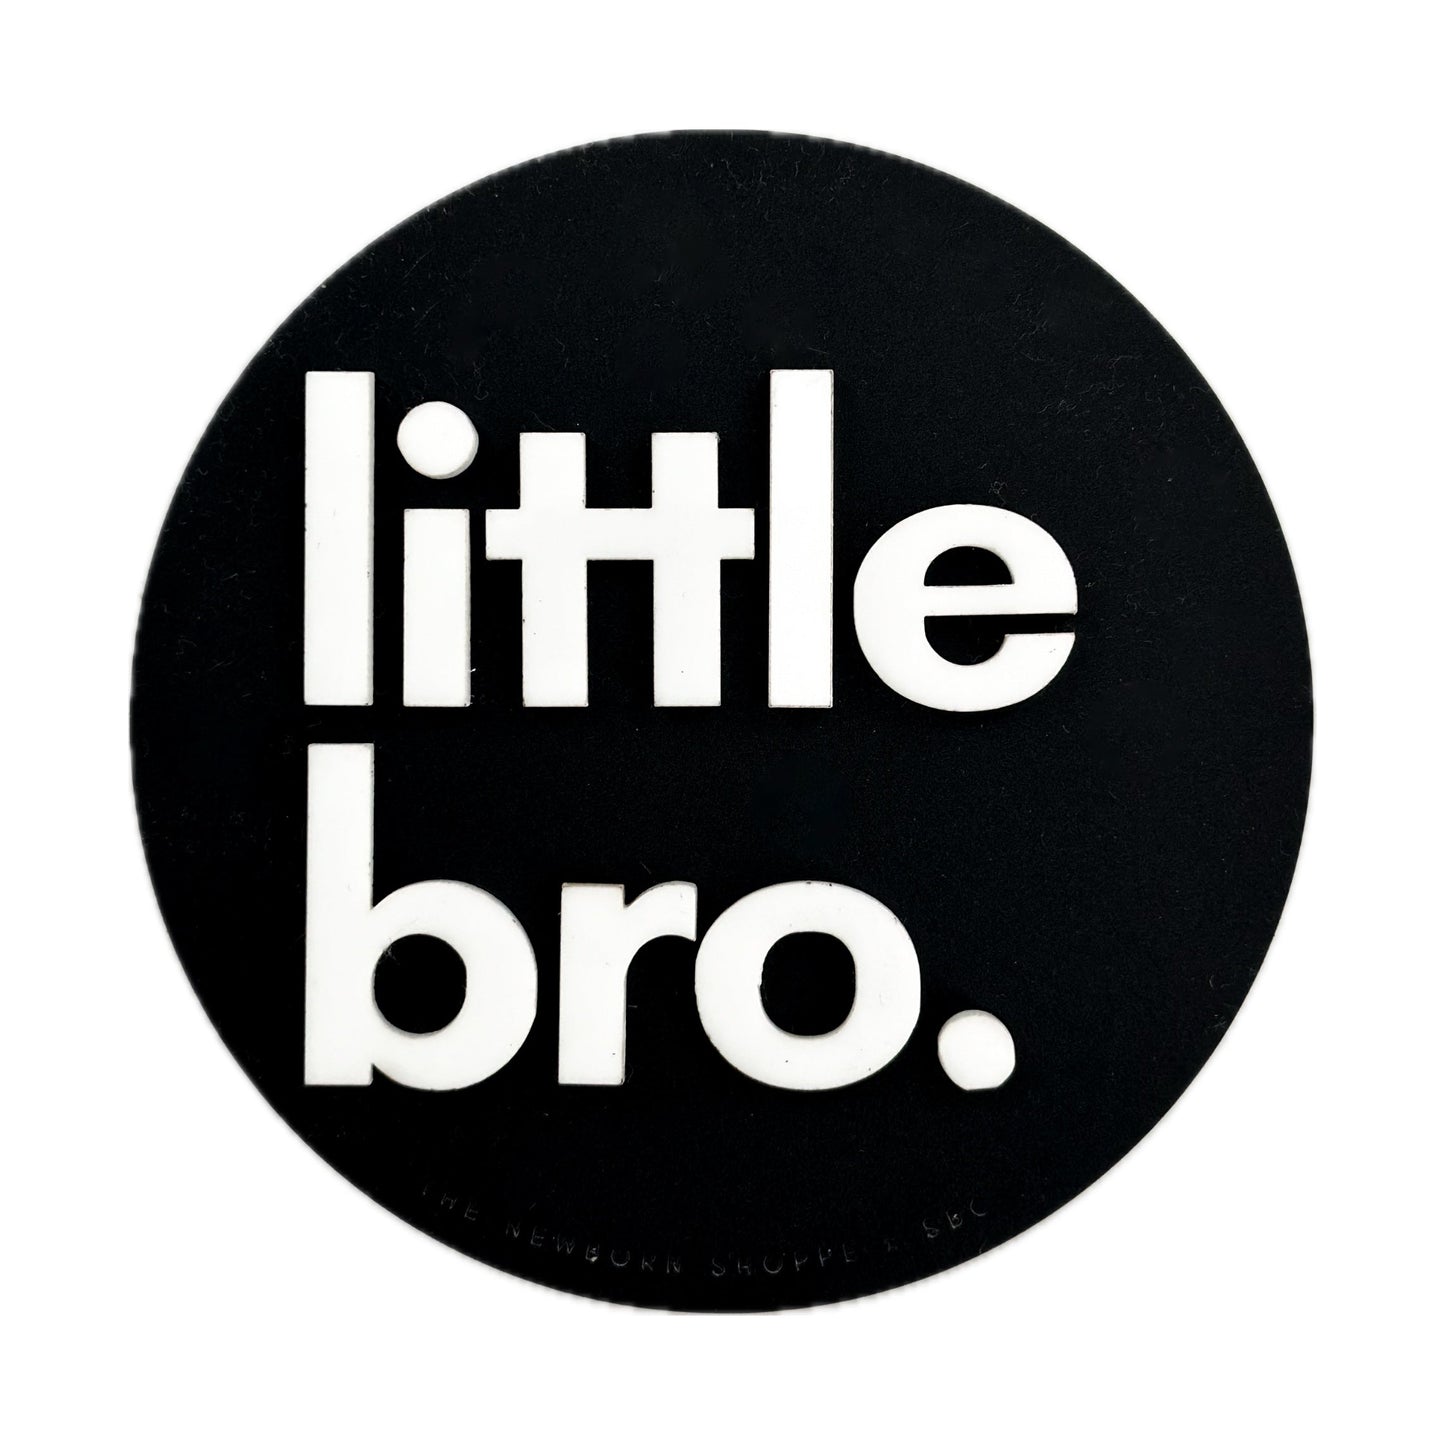 Little Bro — Single Sided Sign